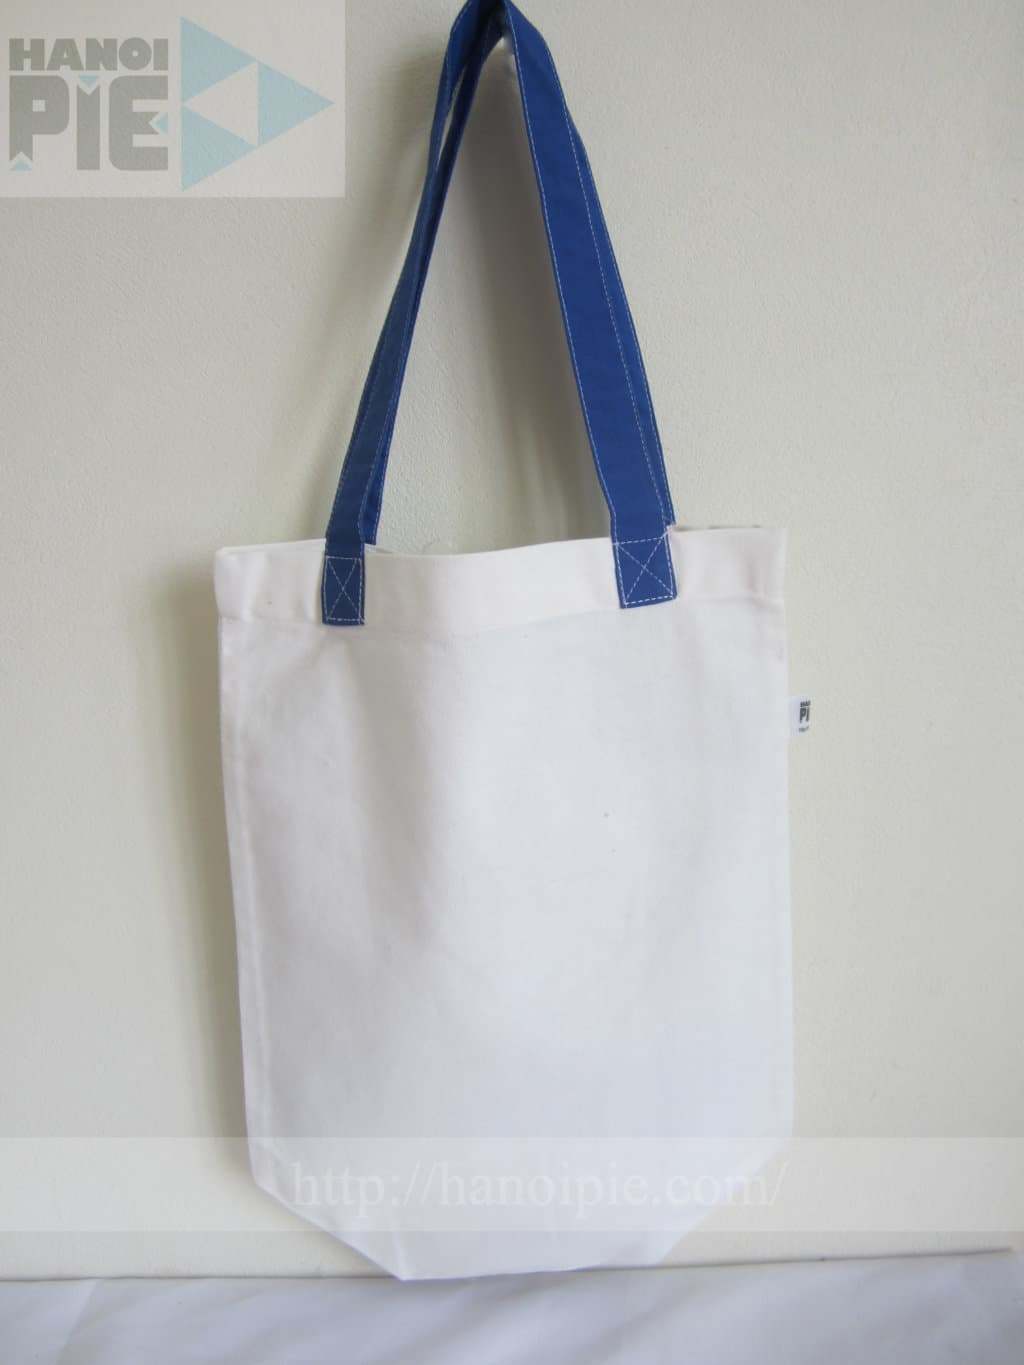 wholesale cotton promotional bags from Vietnam with cheap pr